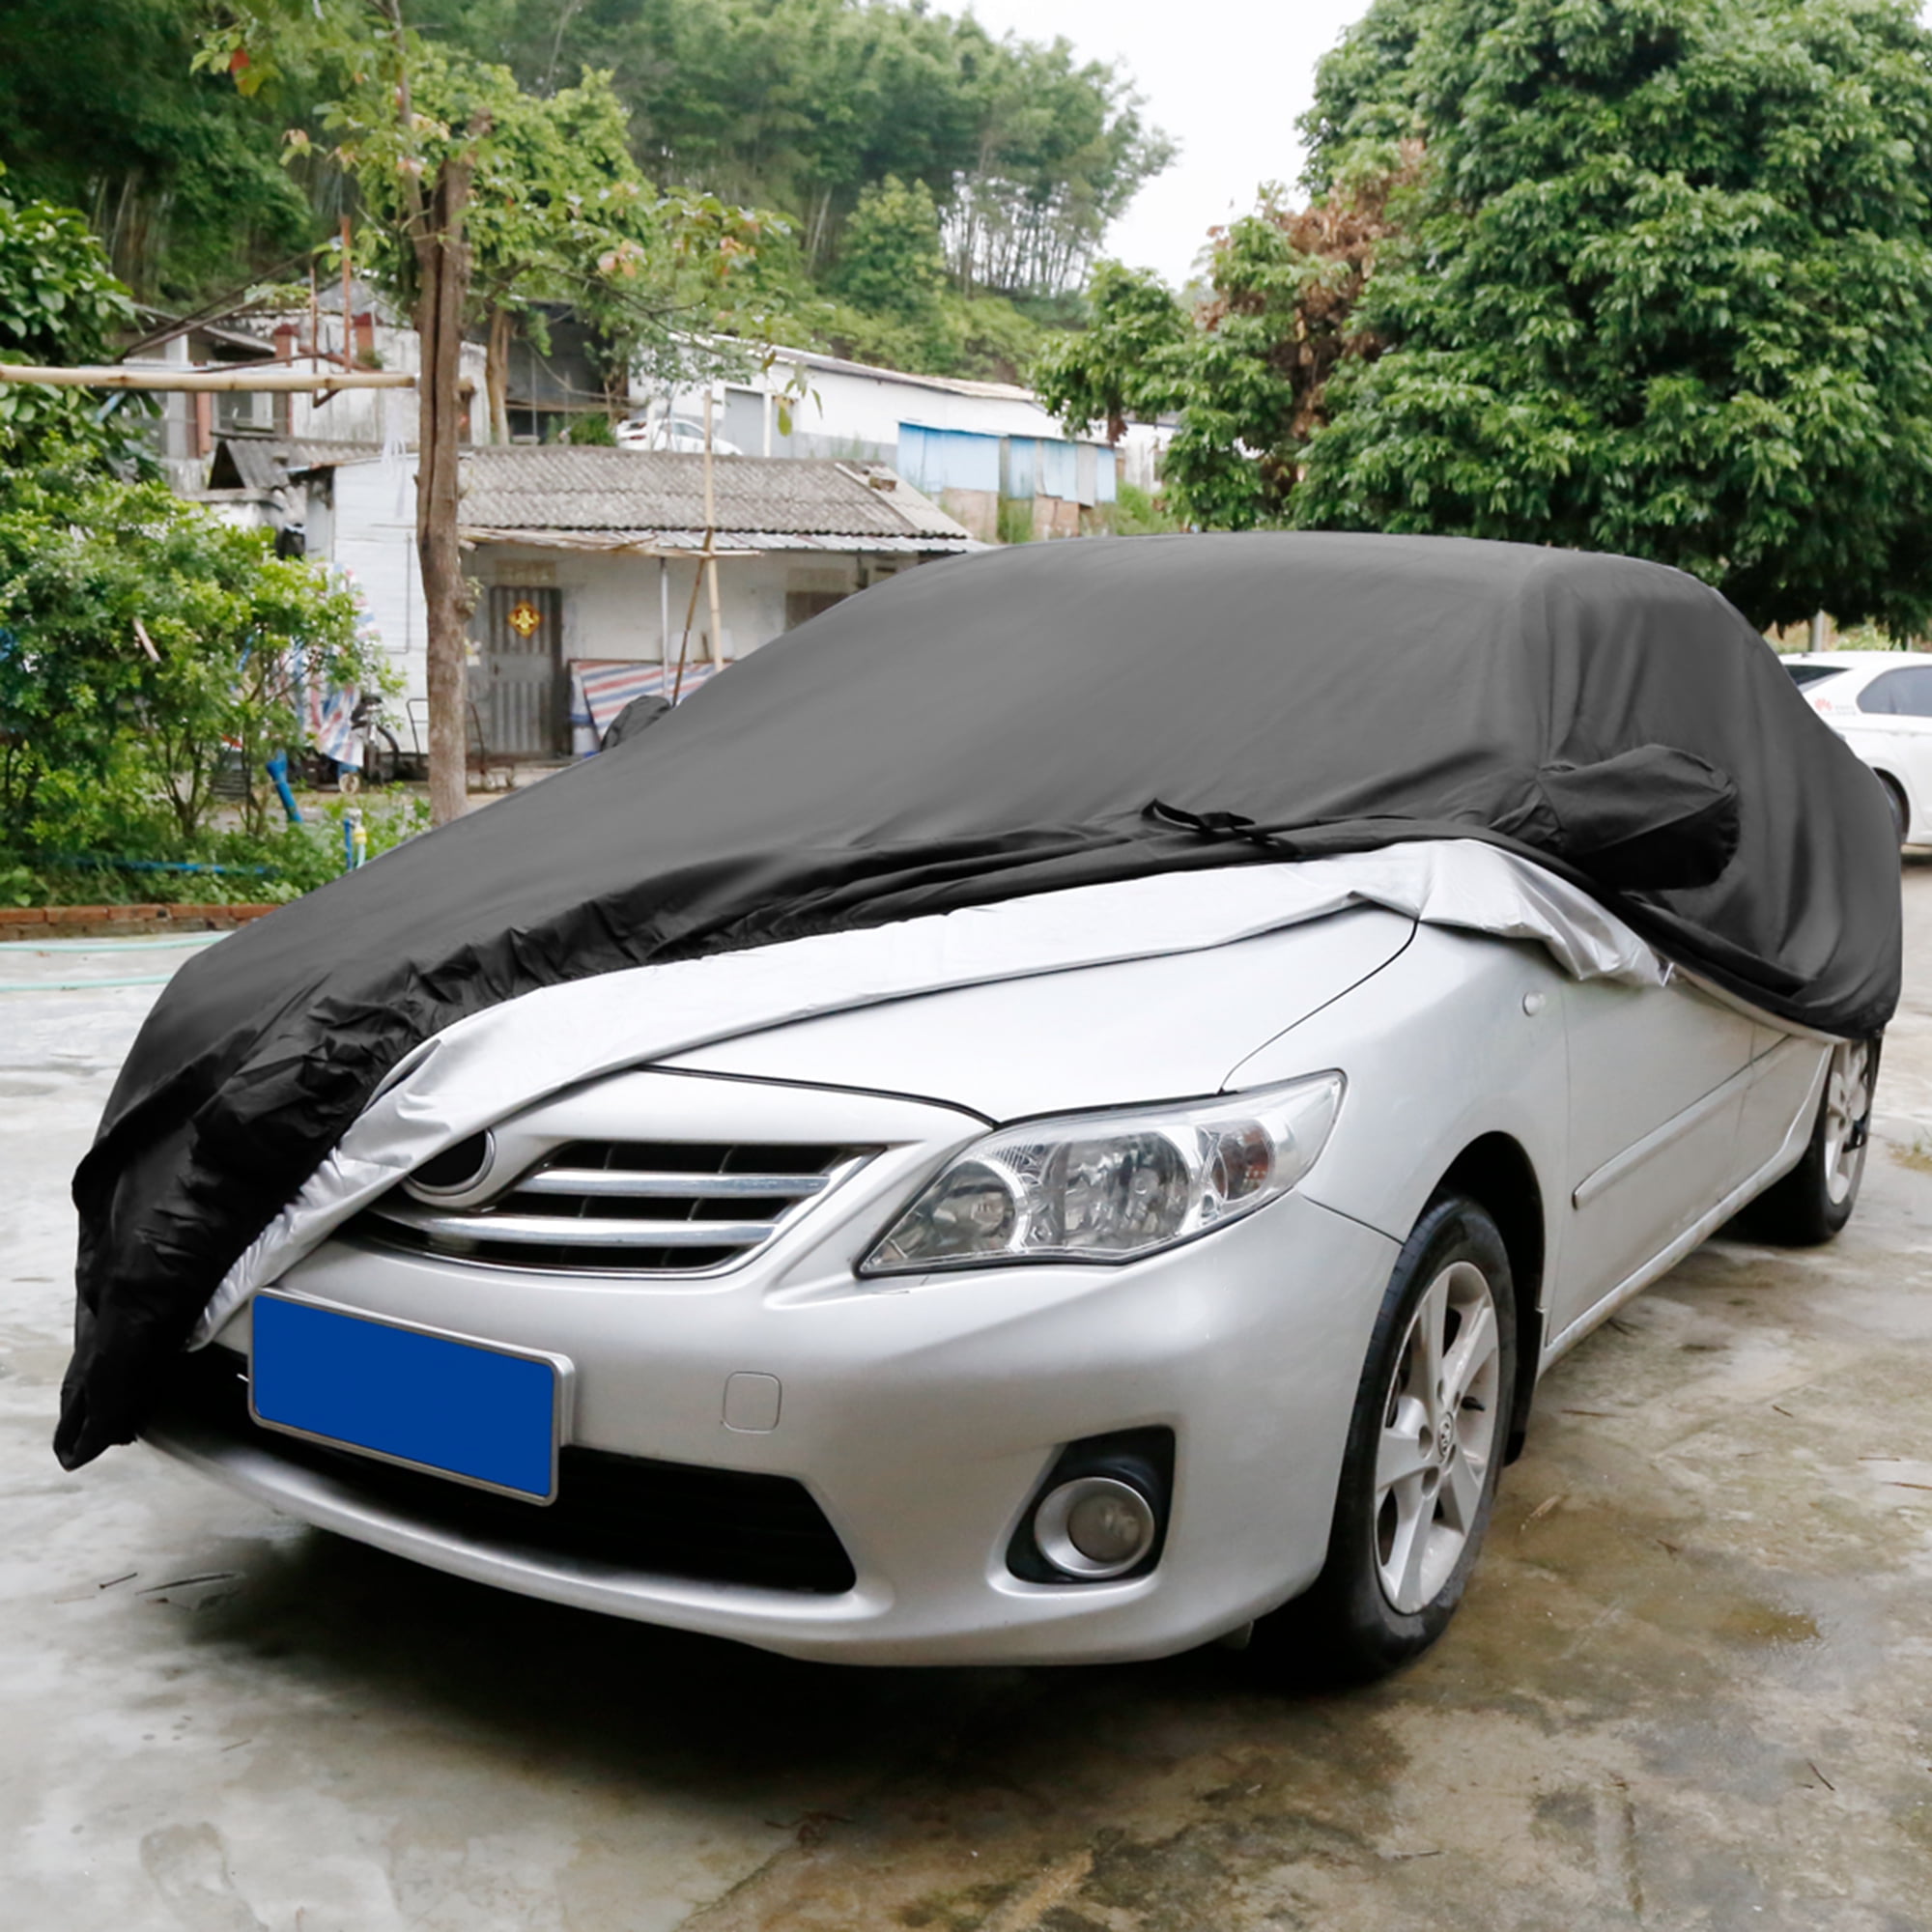  Car Cover Waterproof Breathable for Nissan Micra K14 K13 K10  K11 K12, Durable Outdoor Full Cover,201D Full Waterproof Breathable Scratch  Rain Snow Heat Resistant,Breathable Cotton Filled (Color : B1 : Automotive